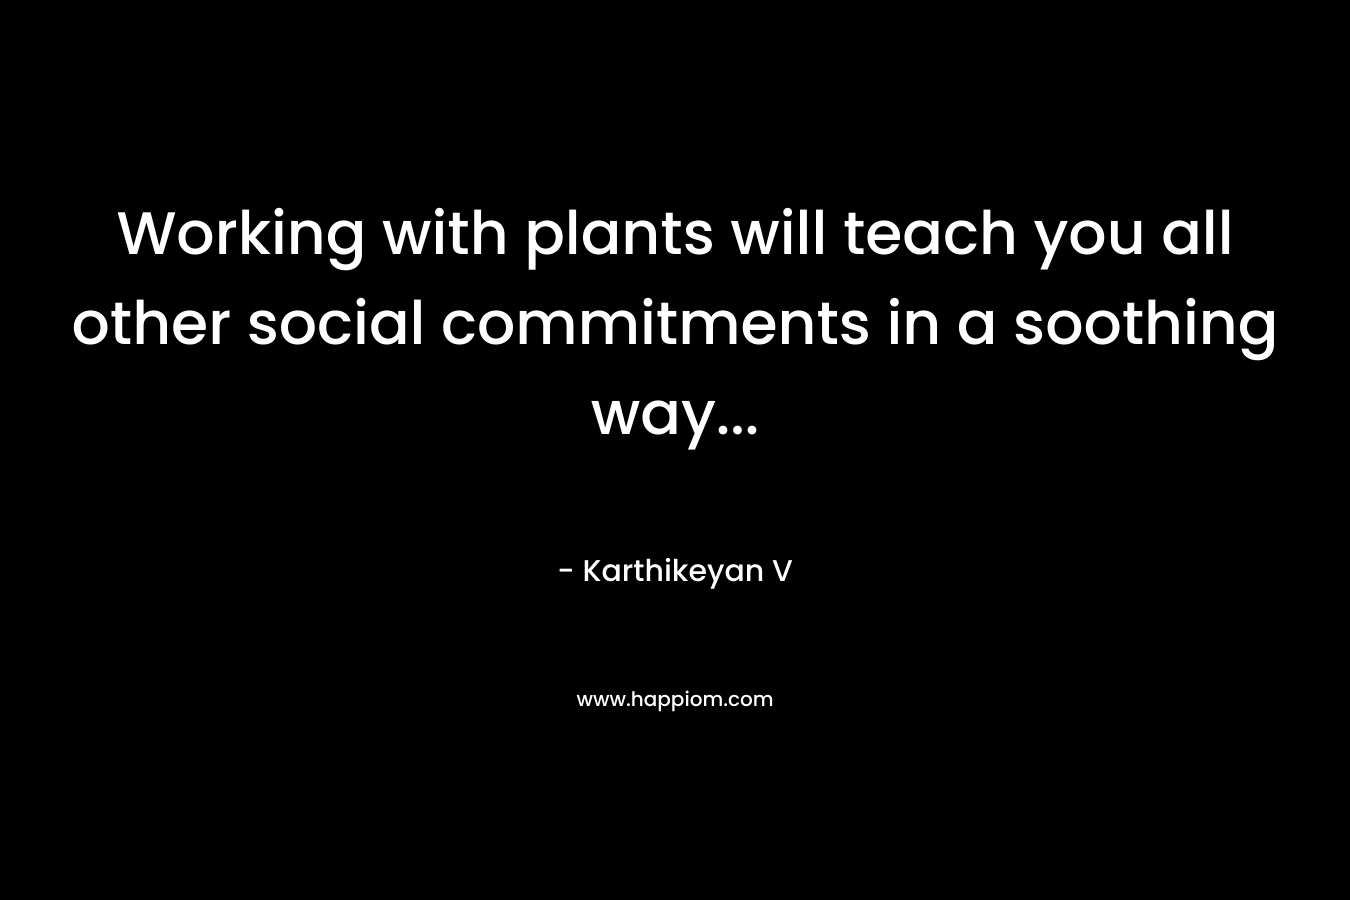 Working with plants will teach you all other social commitments in a soothing way… – Karthikeyan V